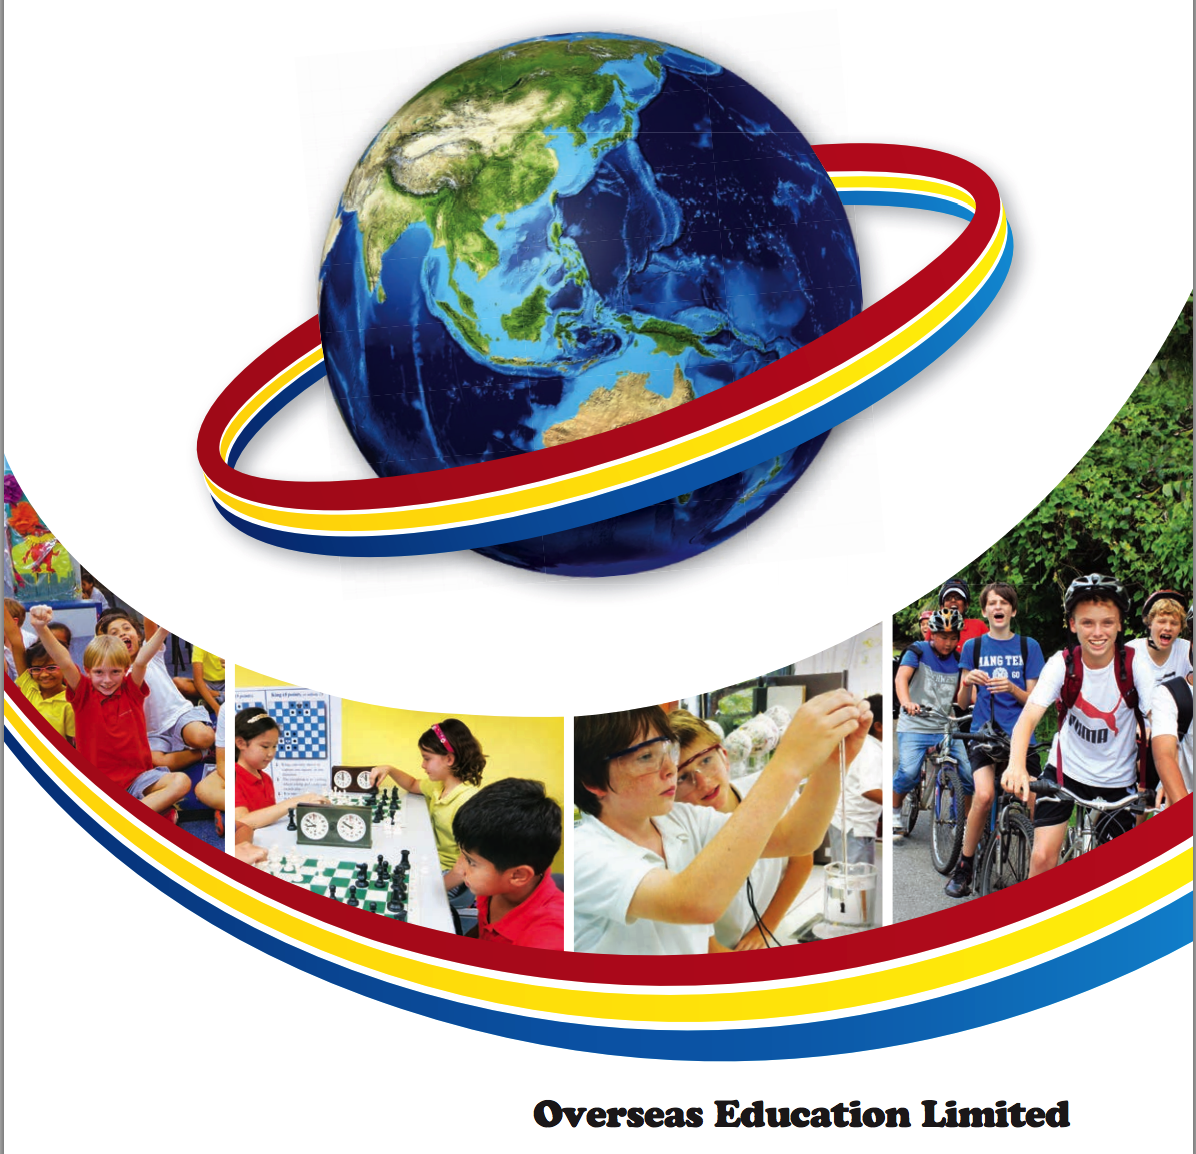 Overseas Education Ltd - Maybank Kim Eng 2015-11-03: Short of Students; D/G to HOLD